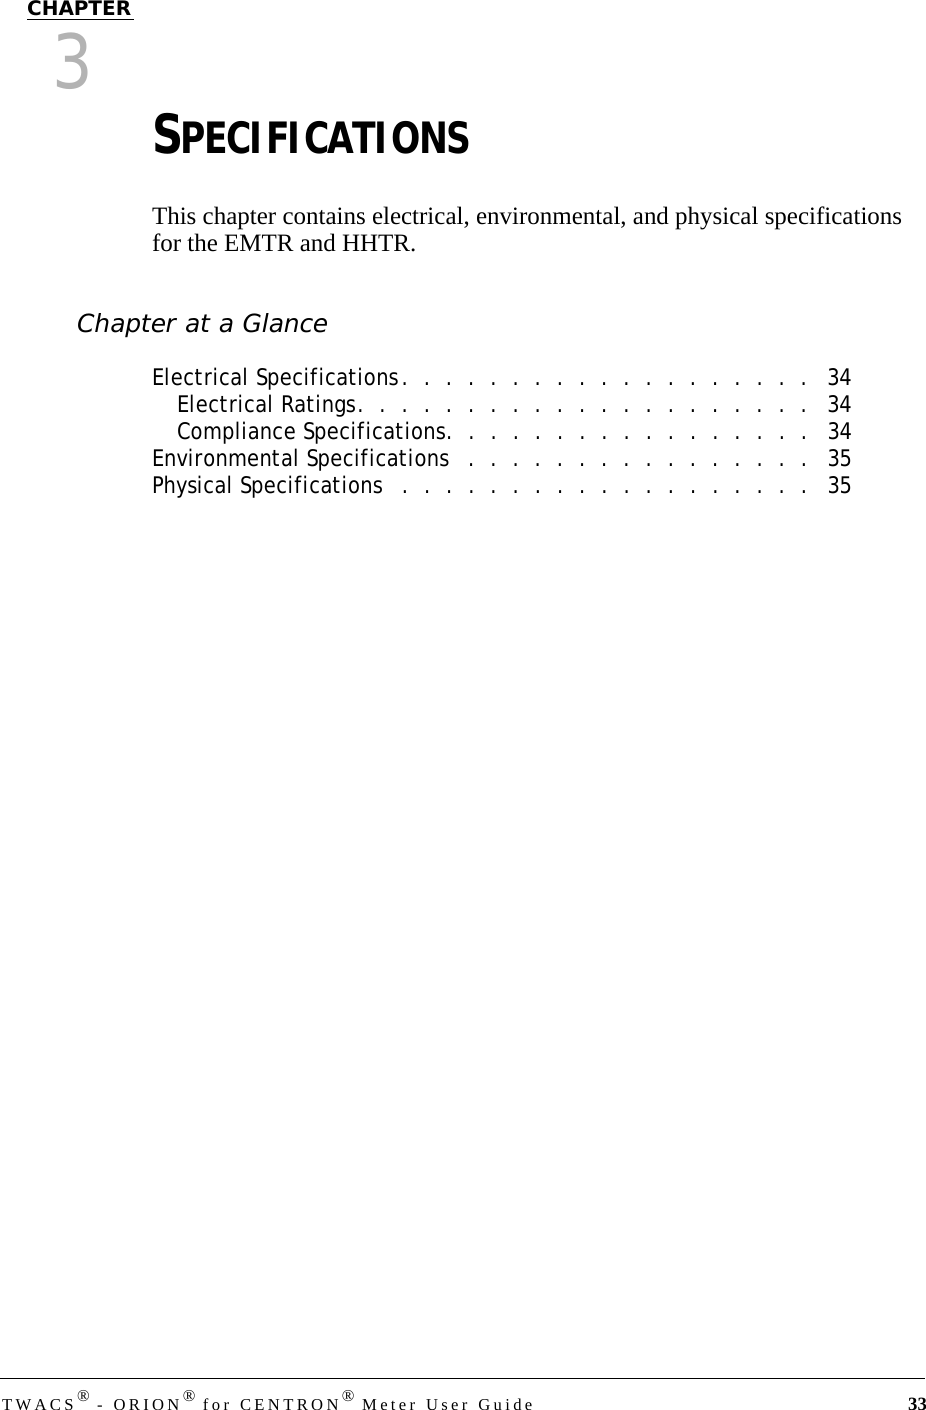 TWACS® - ORION® for CENTRON® Meter User Guide 33CHAPTER3SPECIFICATIONSThis chapter contains electrical, environmental, and physical specifications for the EMTR and HHTR.Chapter at a GlanceElectrical Specifications.  .  .  .  .  .  .  .  .  .  .  .  .  .  .  .  .  .  .   34Electrical Ratings.  .  .  .  .  .  .  .  .  .  .  .  .  .  .  .  .  .  .  .  .   34Compliance Specifications.  .  .  .  .  .  .  .  .  .  .  .  .  .  .  .  .   34Environmental Specifications   .  .  .  .  .  .  .  .  .  .  .  .  .  .  .  .   35Physical Specifications   .  .  .  .  .  .  .  .  .  .  .  .  .  .  .  .  .  .  .   35